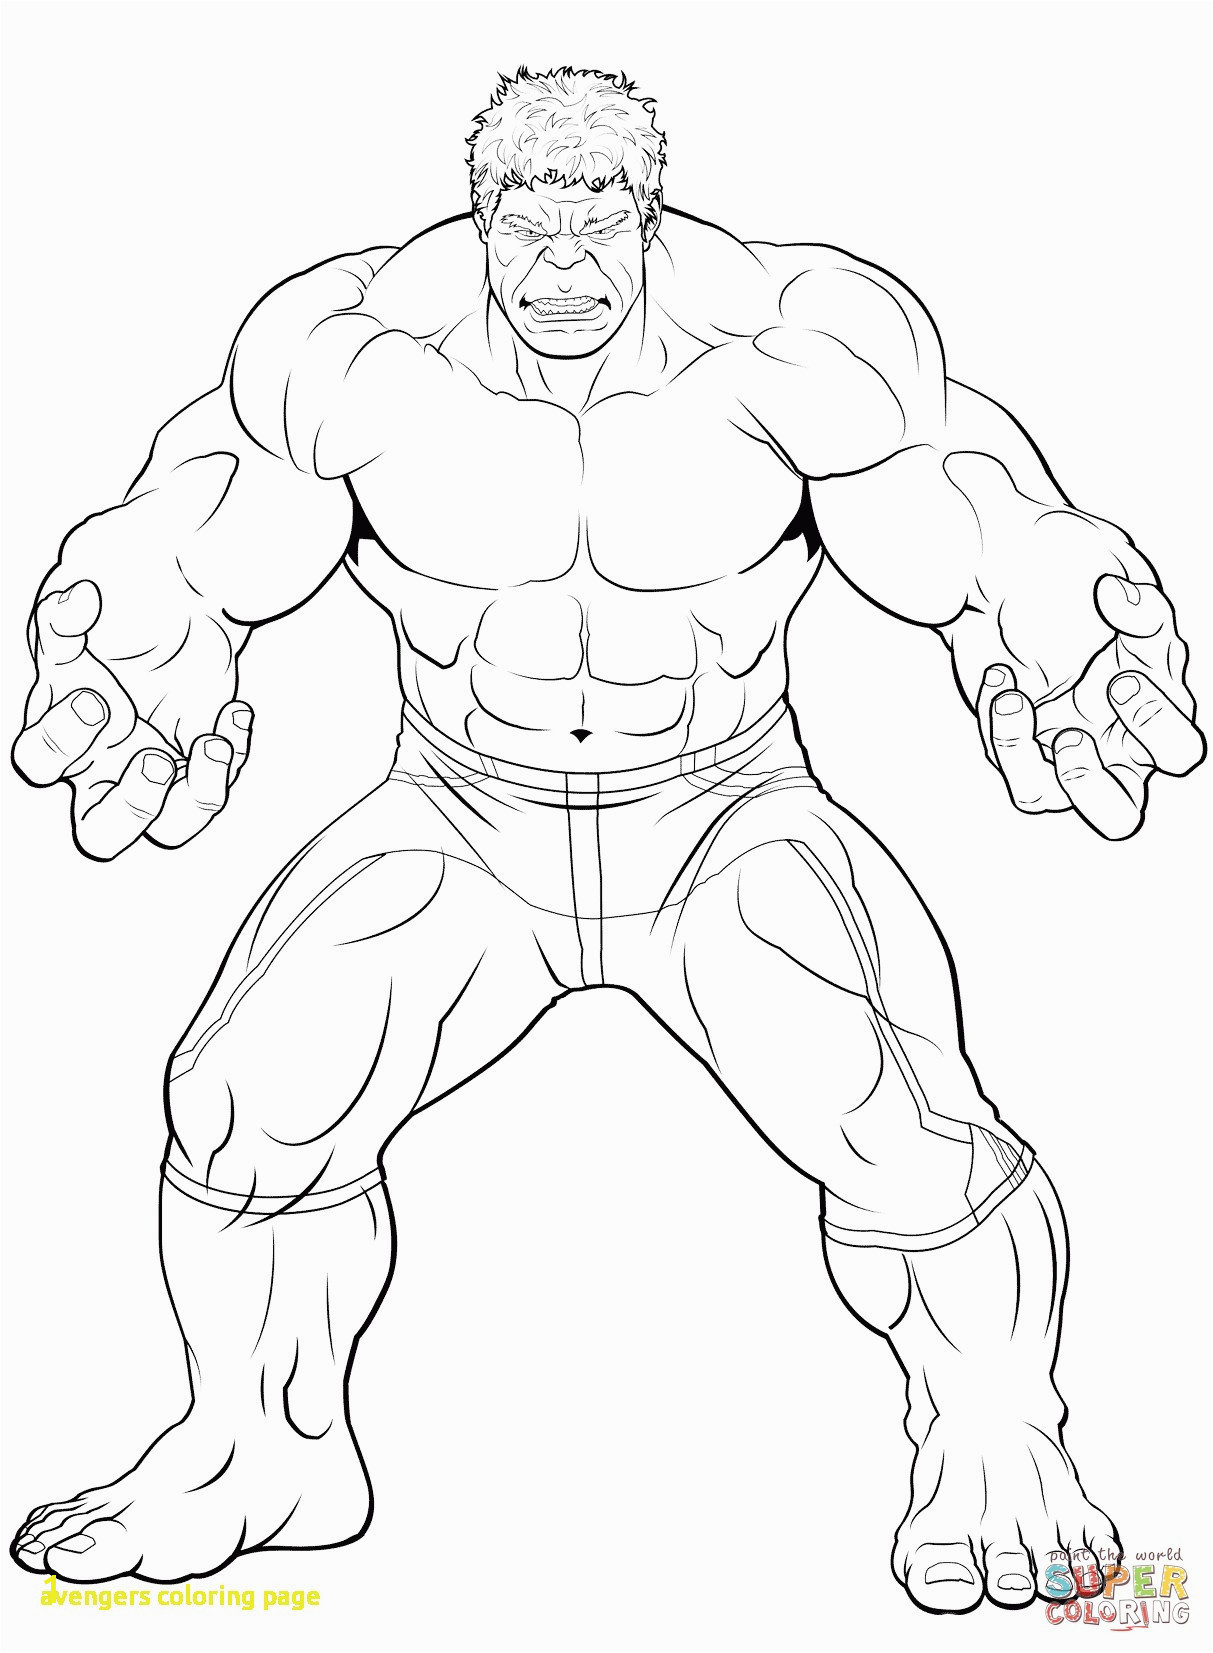 The Incredible Hulk Coloring Pages Cool Red Hulk Coloring Pages – Coloring Sheets Collection